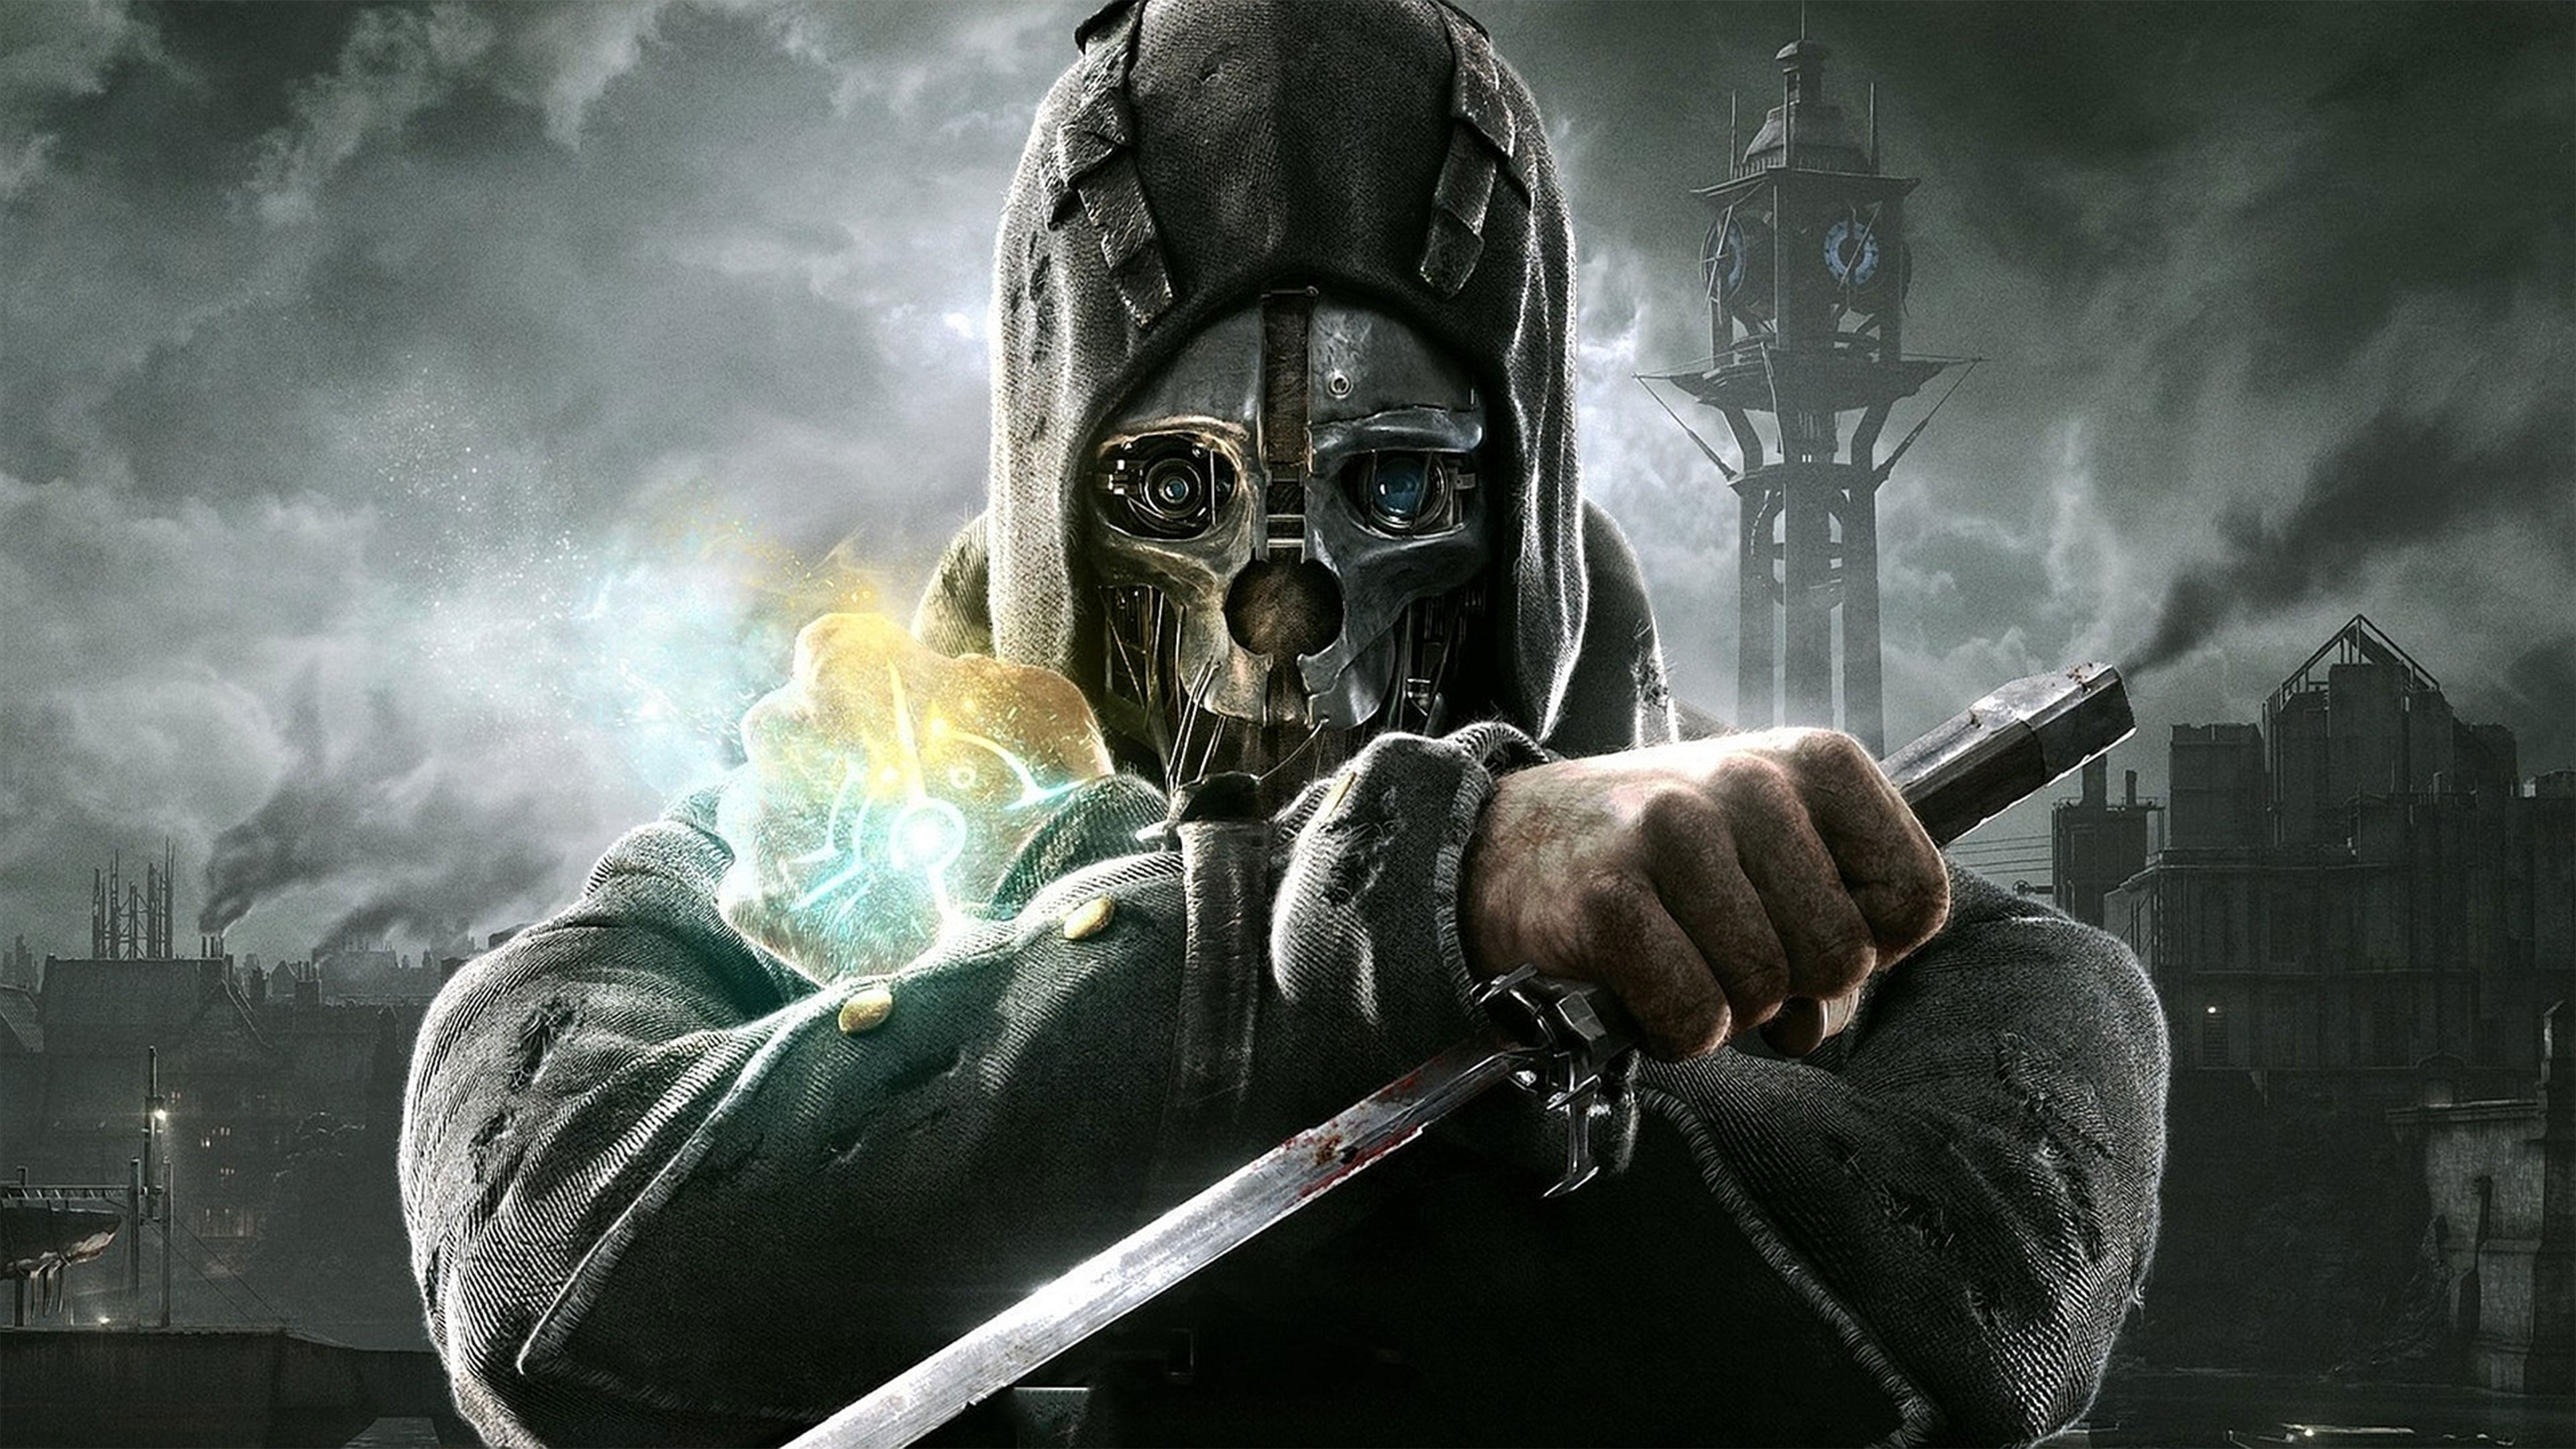 Dishonored 2 Dual Screen Wallpaper by Lariatura on DeviantArt